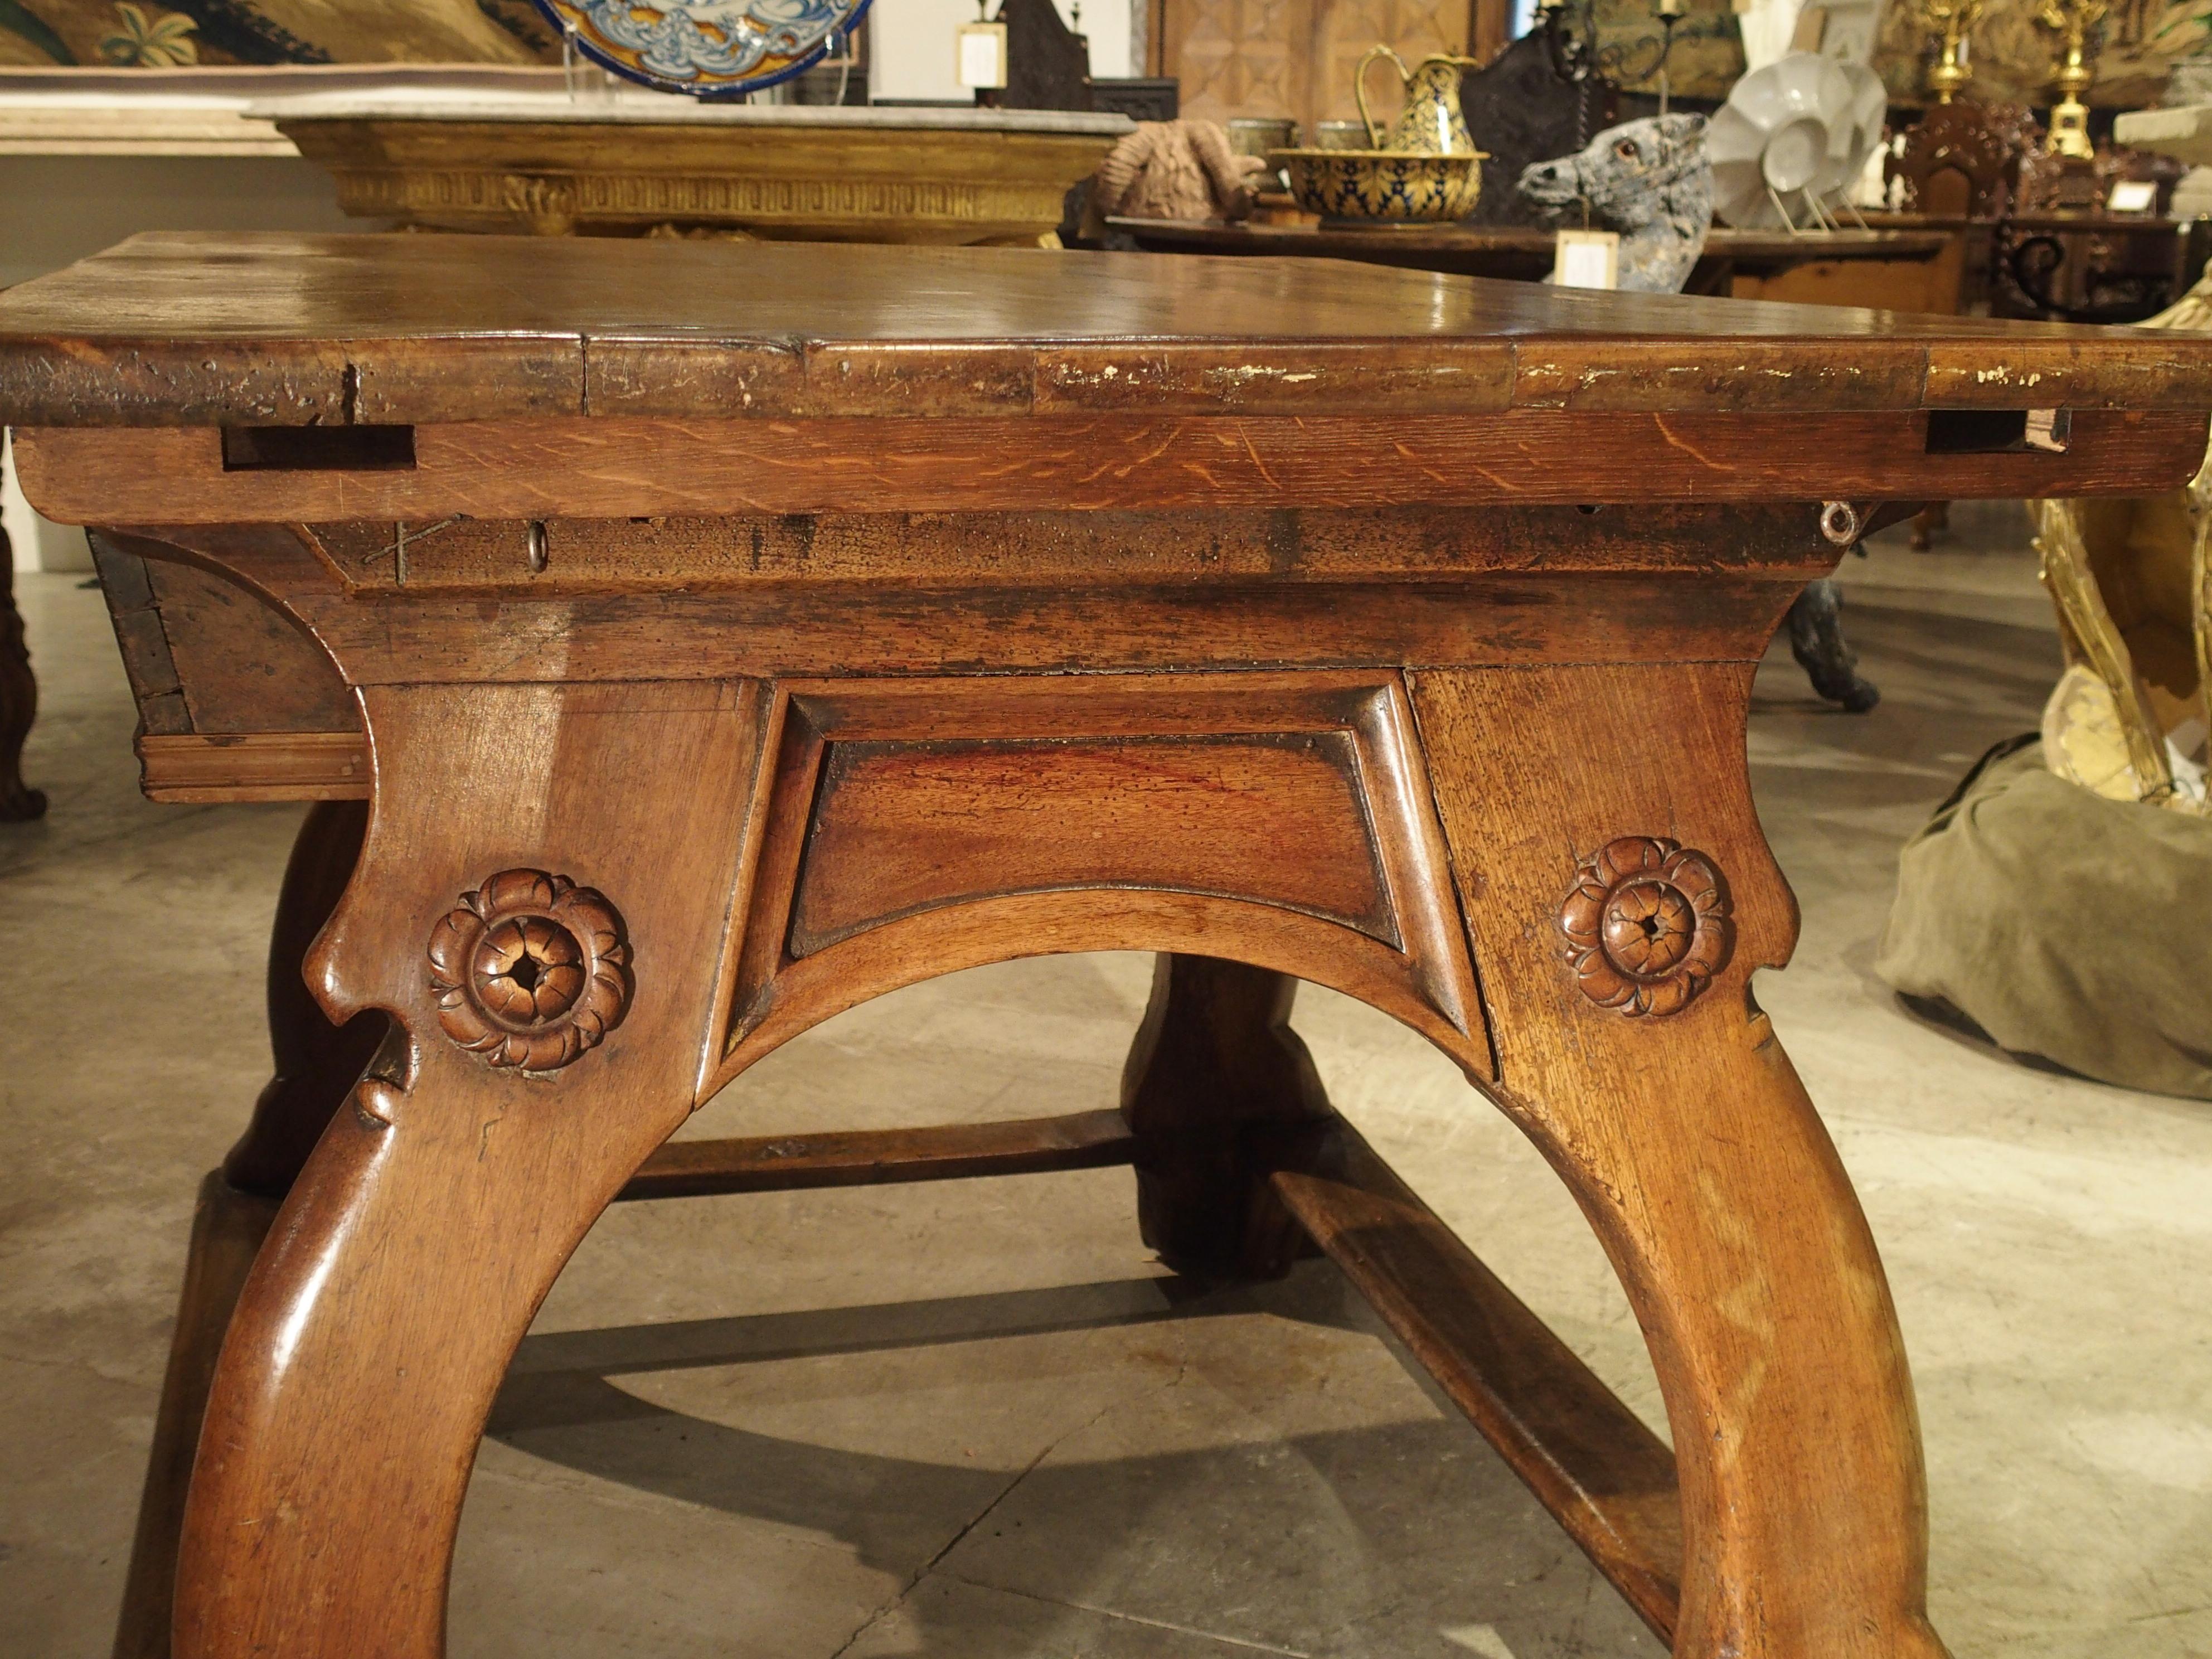 Carved 17th Century Swiss Money Changer Table